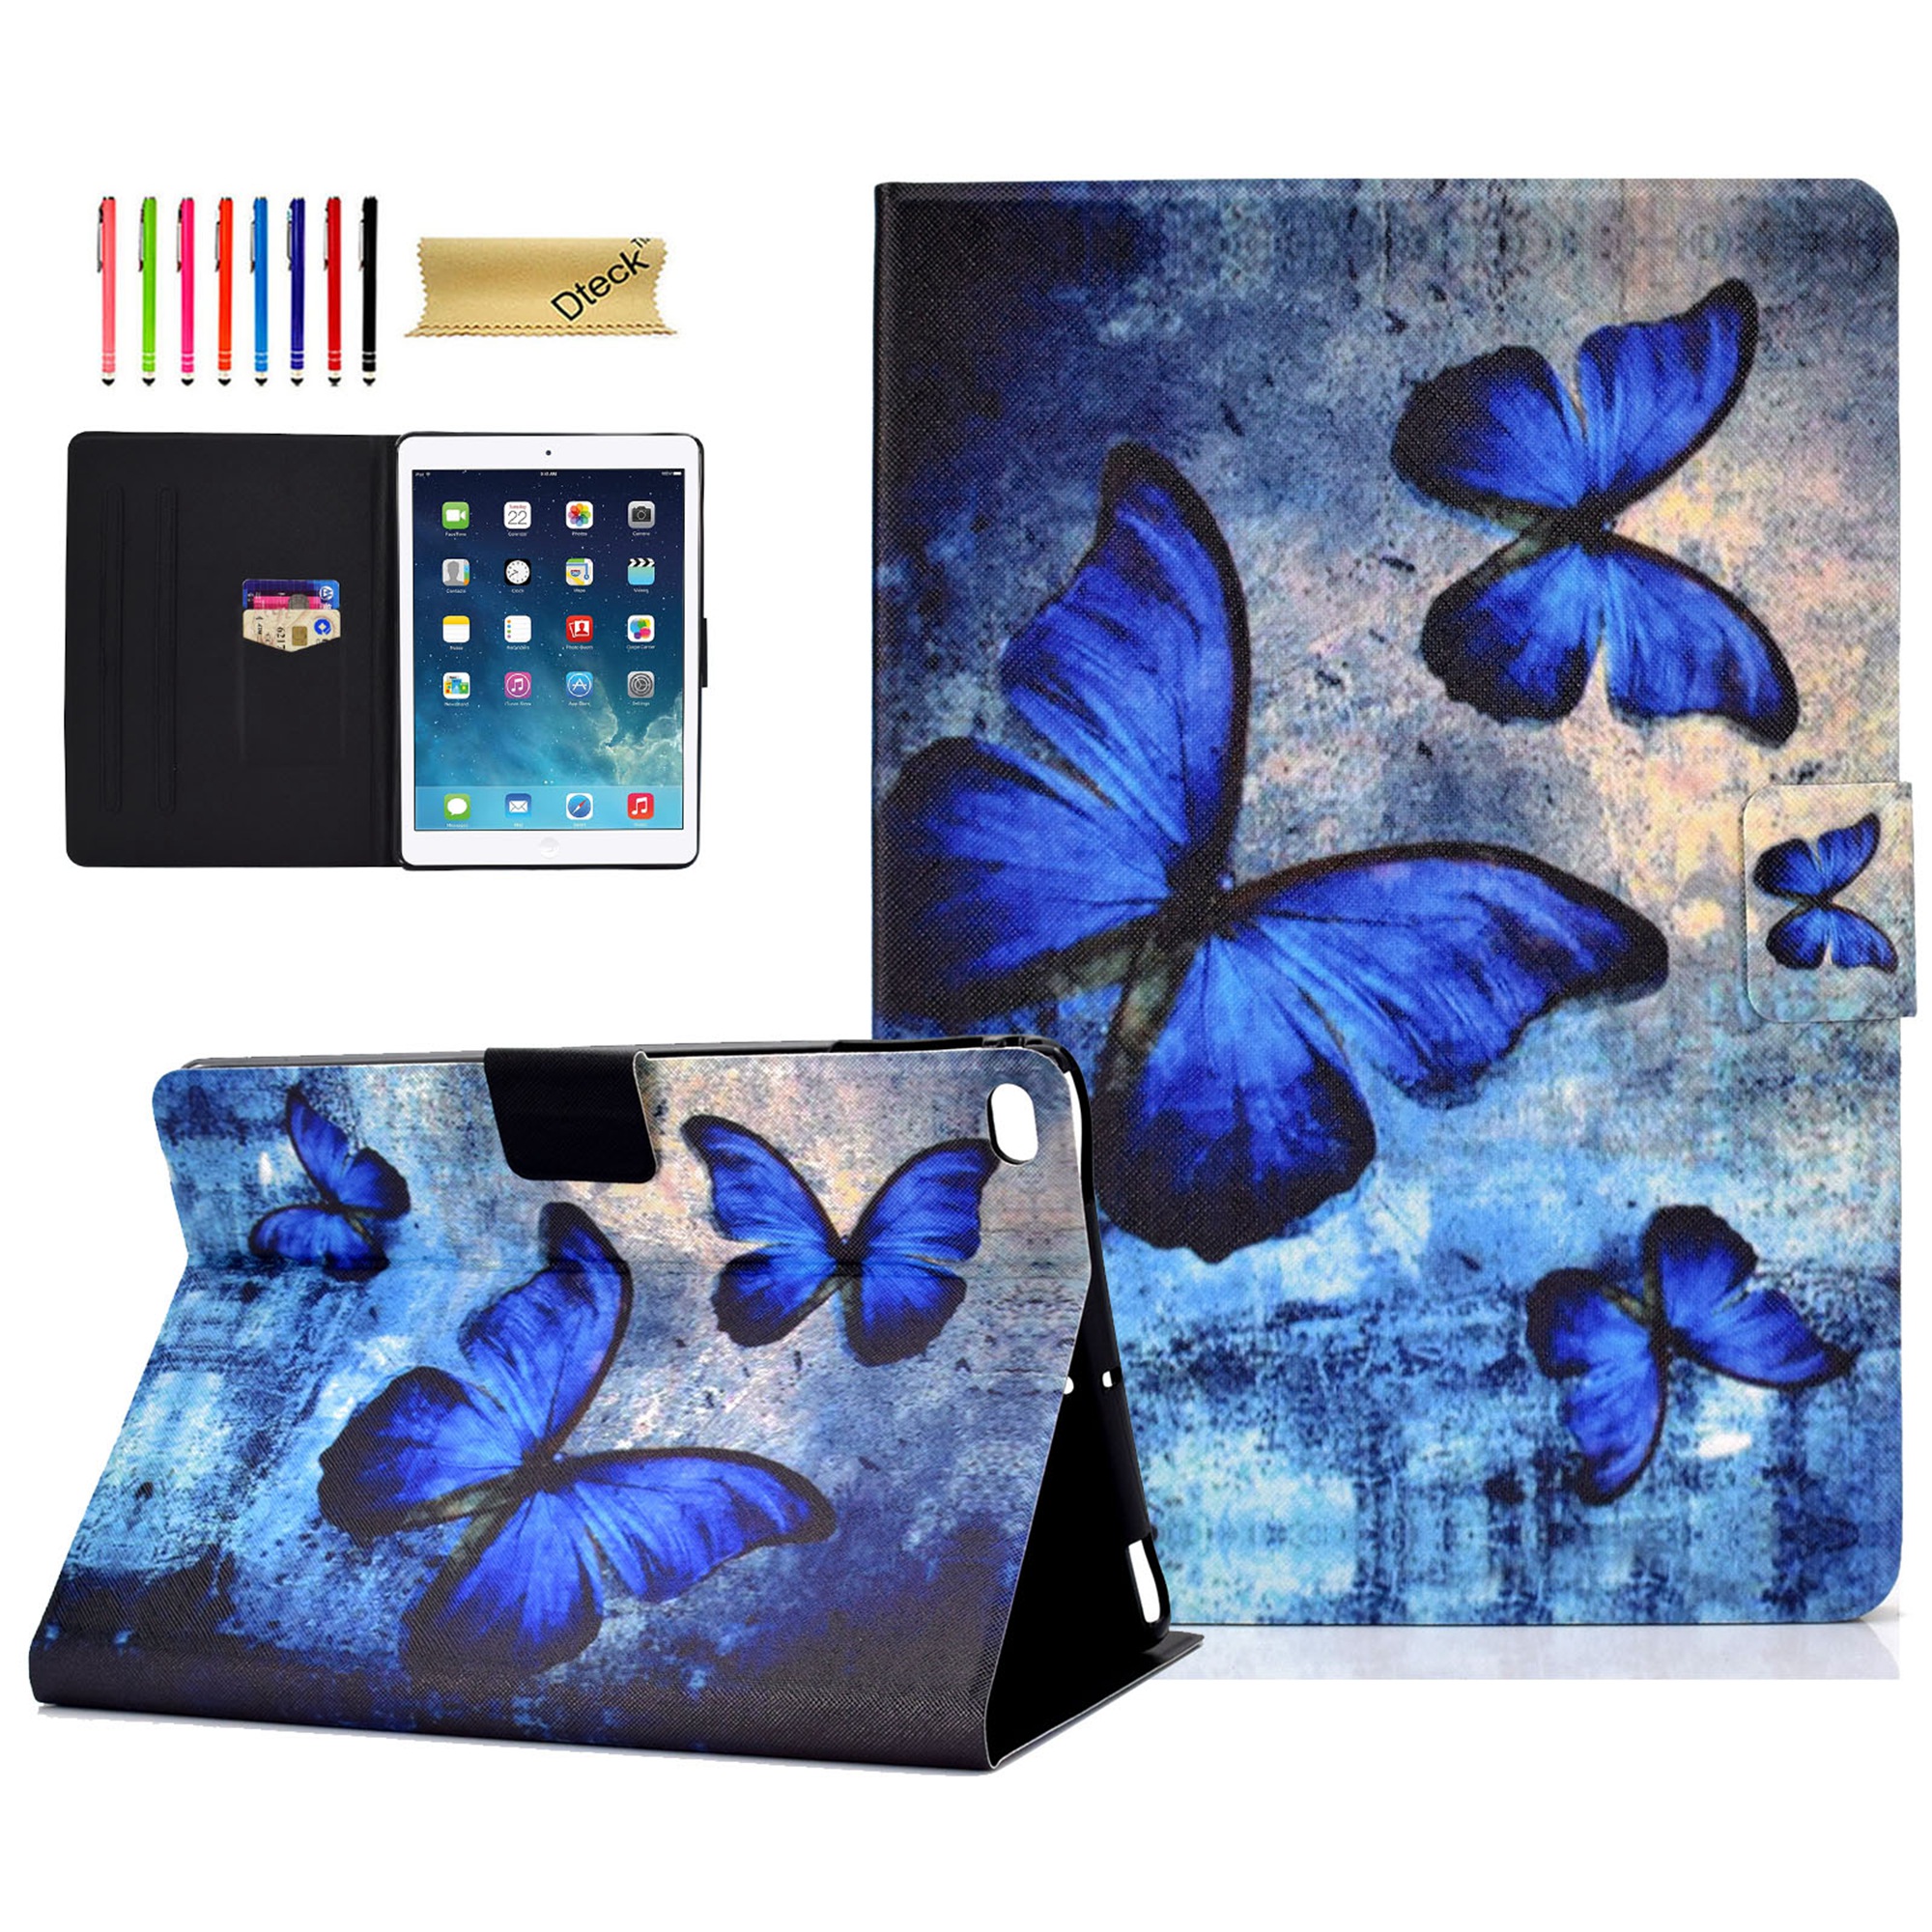 iPad 9.7 inch 2018 2017 Case/iPad Air Case/iPad Air 2 Case/iPad Pro 9.7 Case, Dteck PU Leather Folio Smart Cover with Auto Sleep Wake Stand Wallet Case For iPad 9.7" (Not fit iPad 2 3 4),Butterfly - image 1 of 1